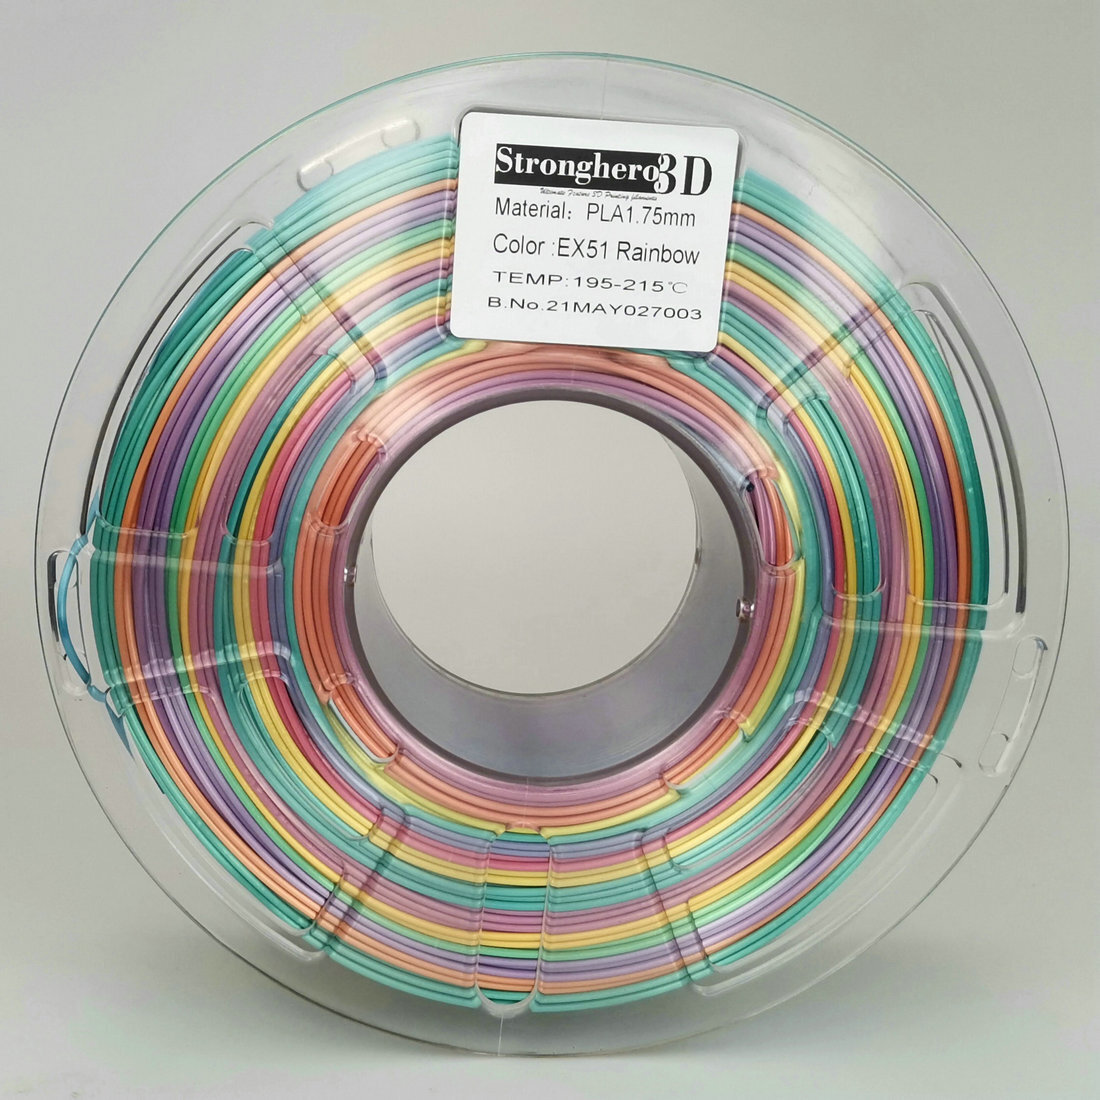 Worldwide available latest products Stronghero3D PLA 3D Printer filament  1.75mm Net weight 1kg accuracy +/-0.05mm